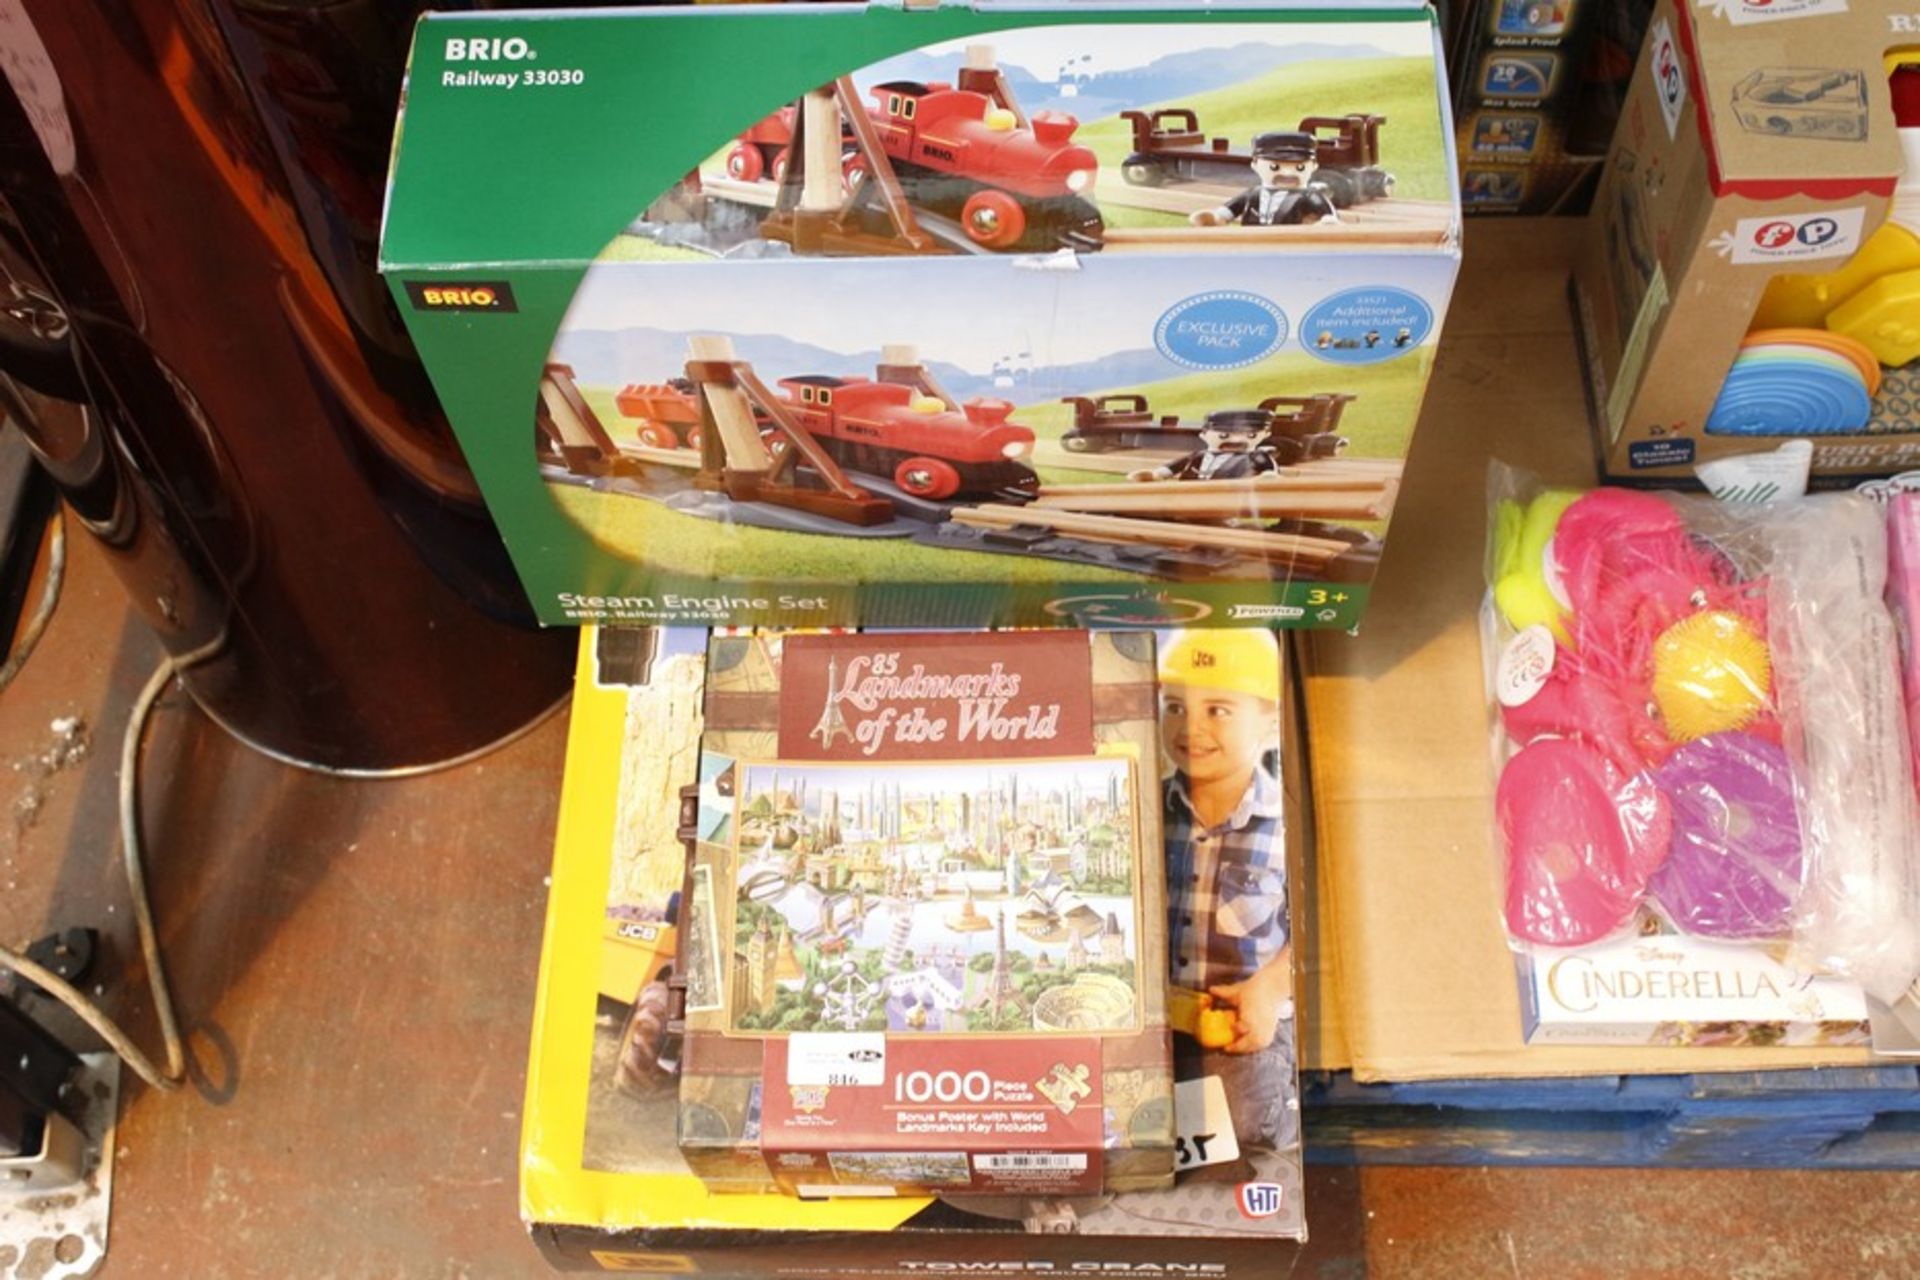 3 x BOXED ASSORTED TOYS TO INCLUDE BRIO STEAM ENGINE SET JCB TOWER CRANE AND A 1000 PIECE JIGSAW